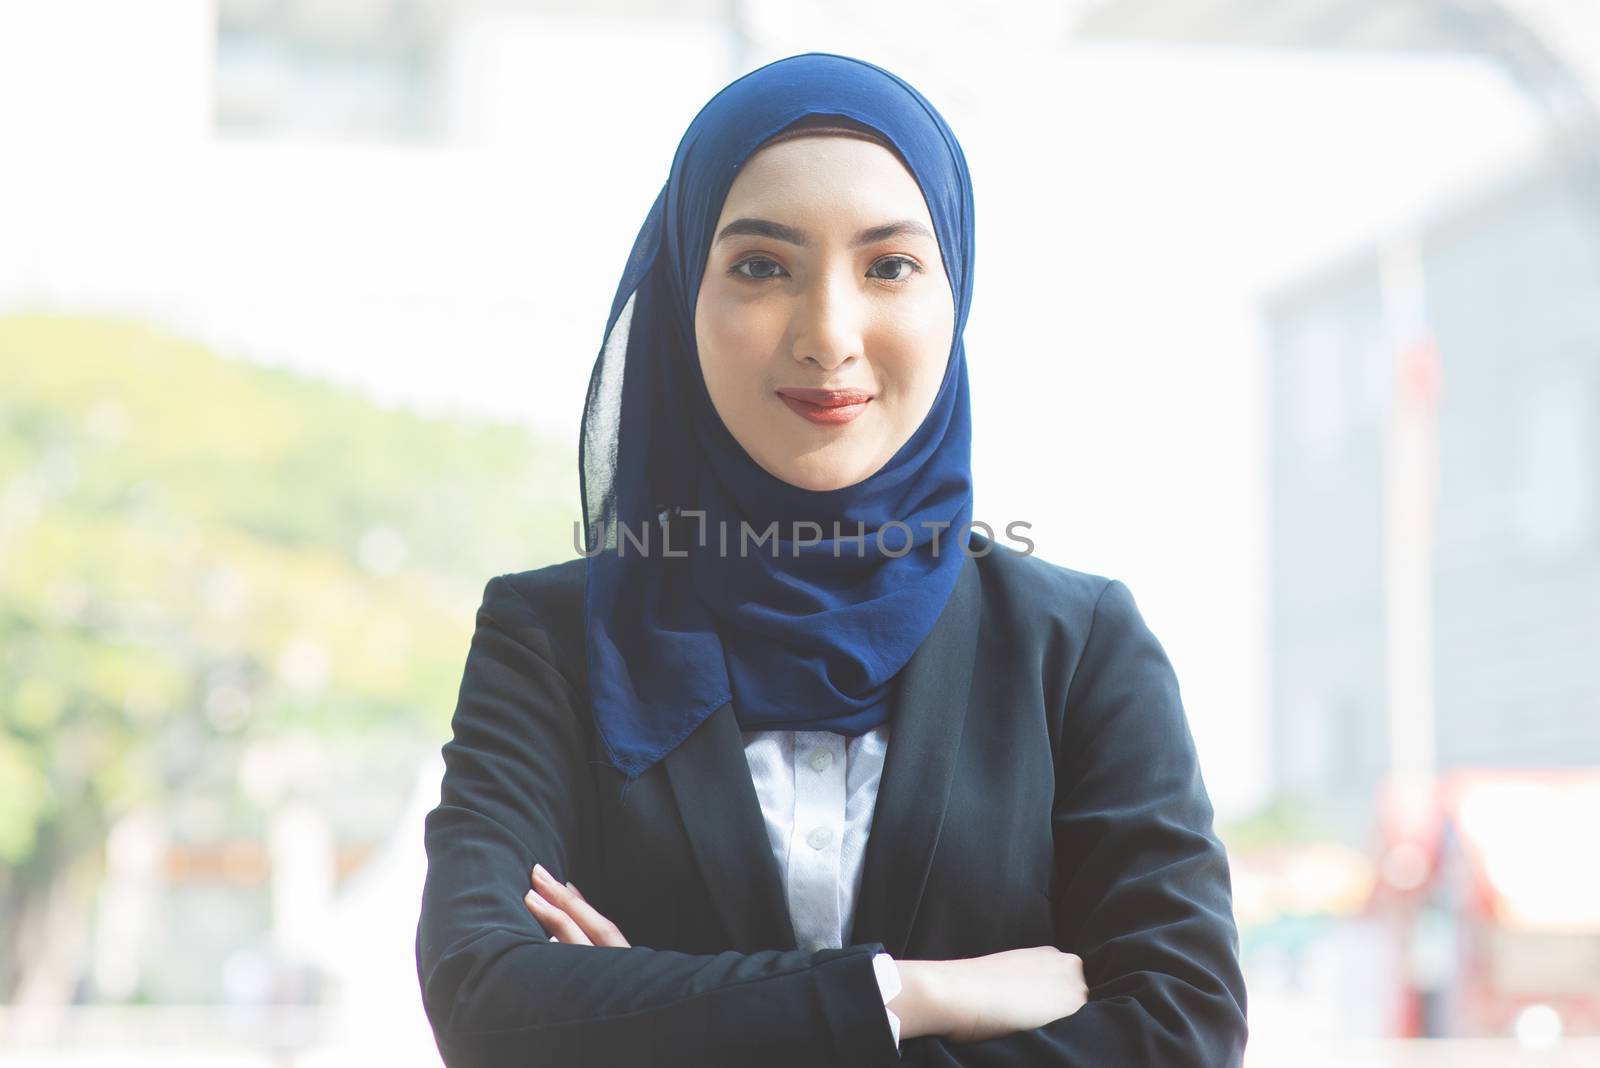 Portrait of Muslim woman in business suit, arms crossed and smile looking at camera.